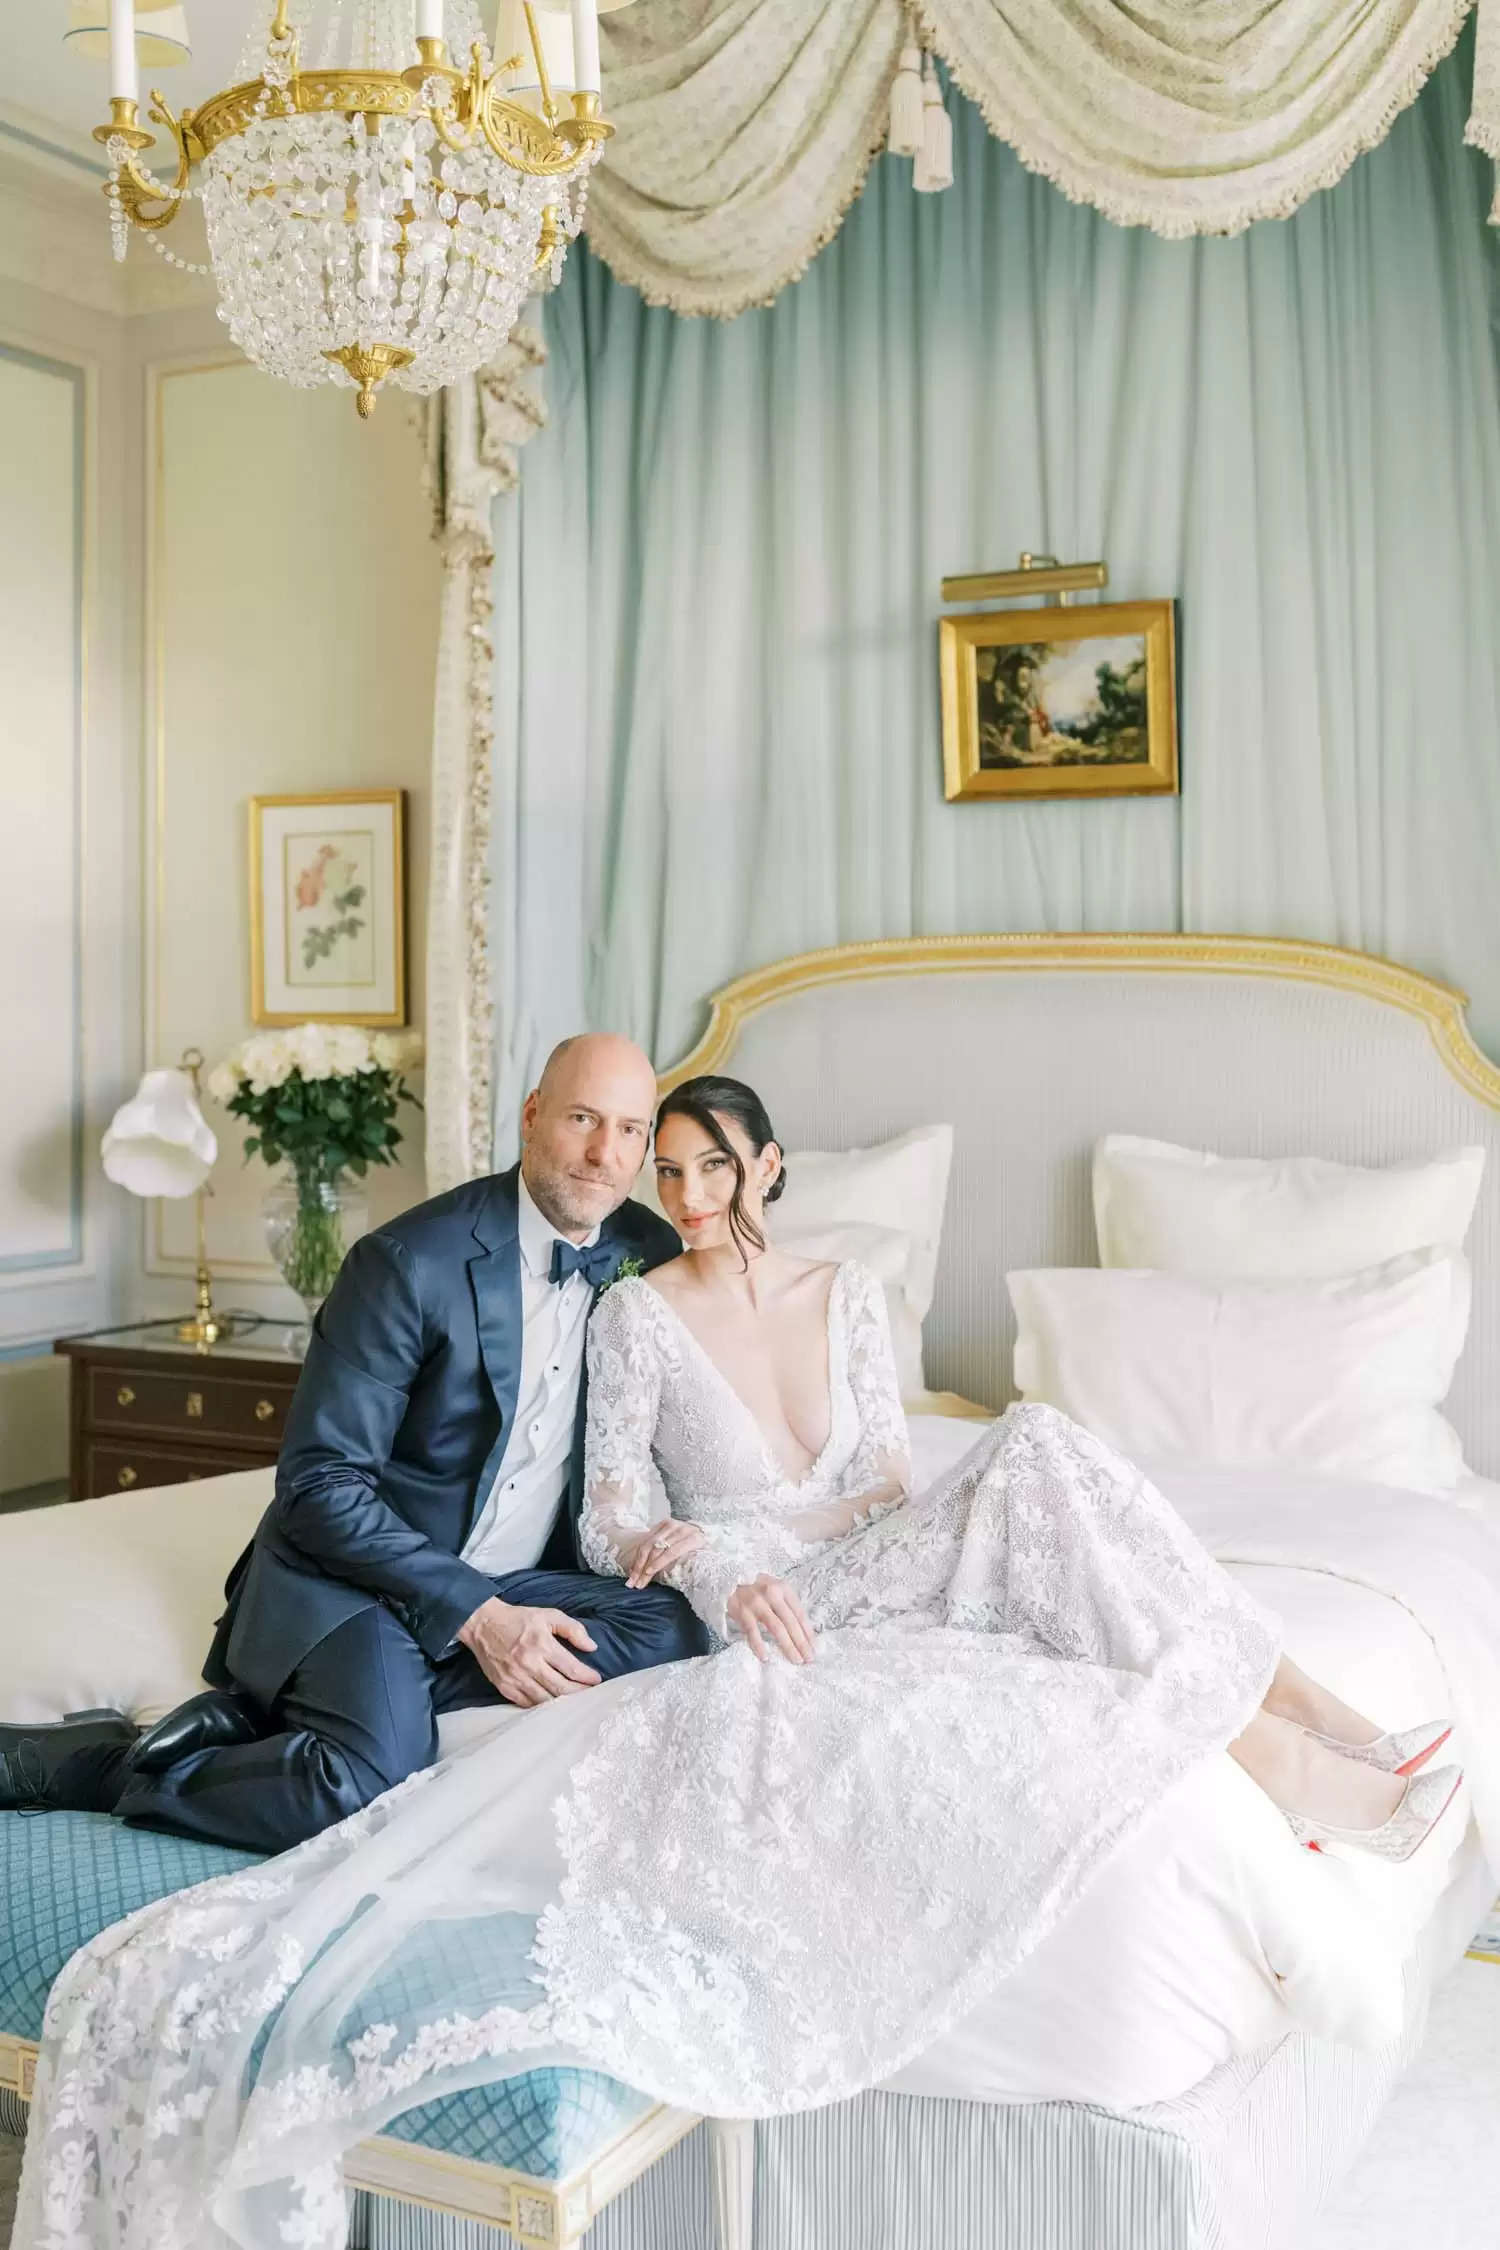 Molly Carr Named One of many Prime Paris Marriage ceremony Photographers